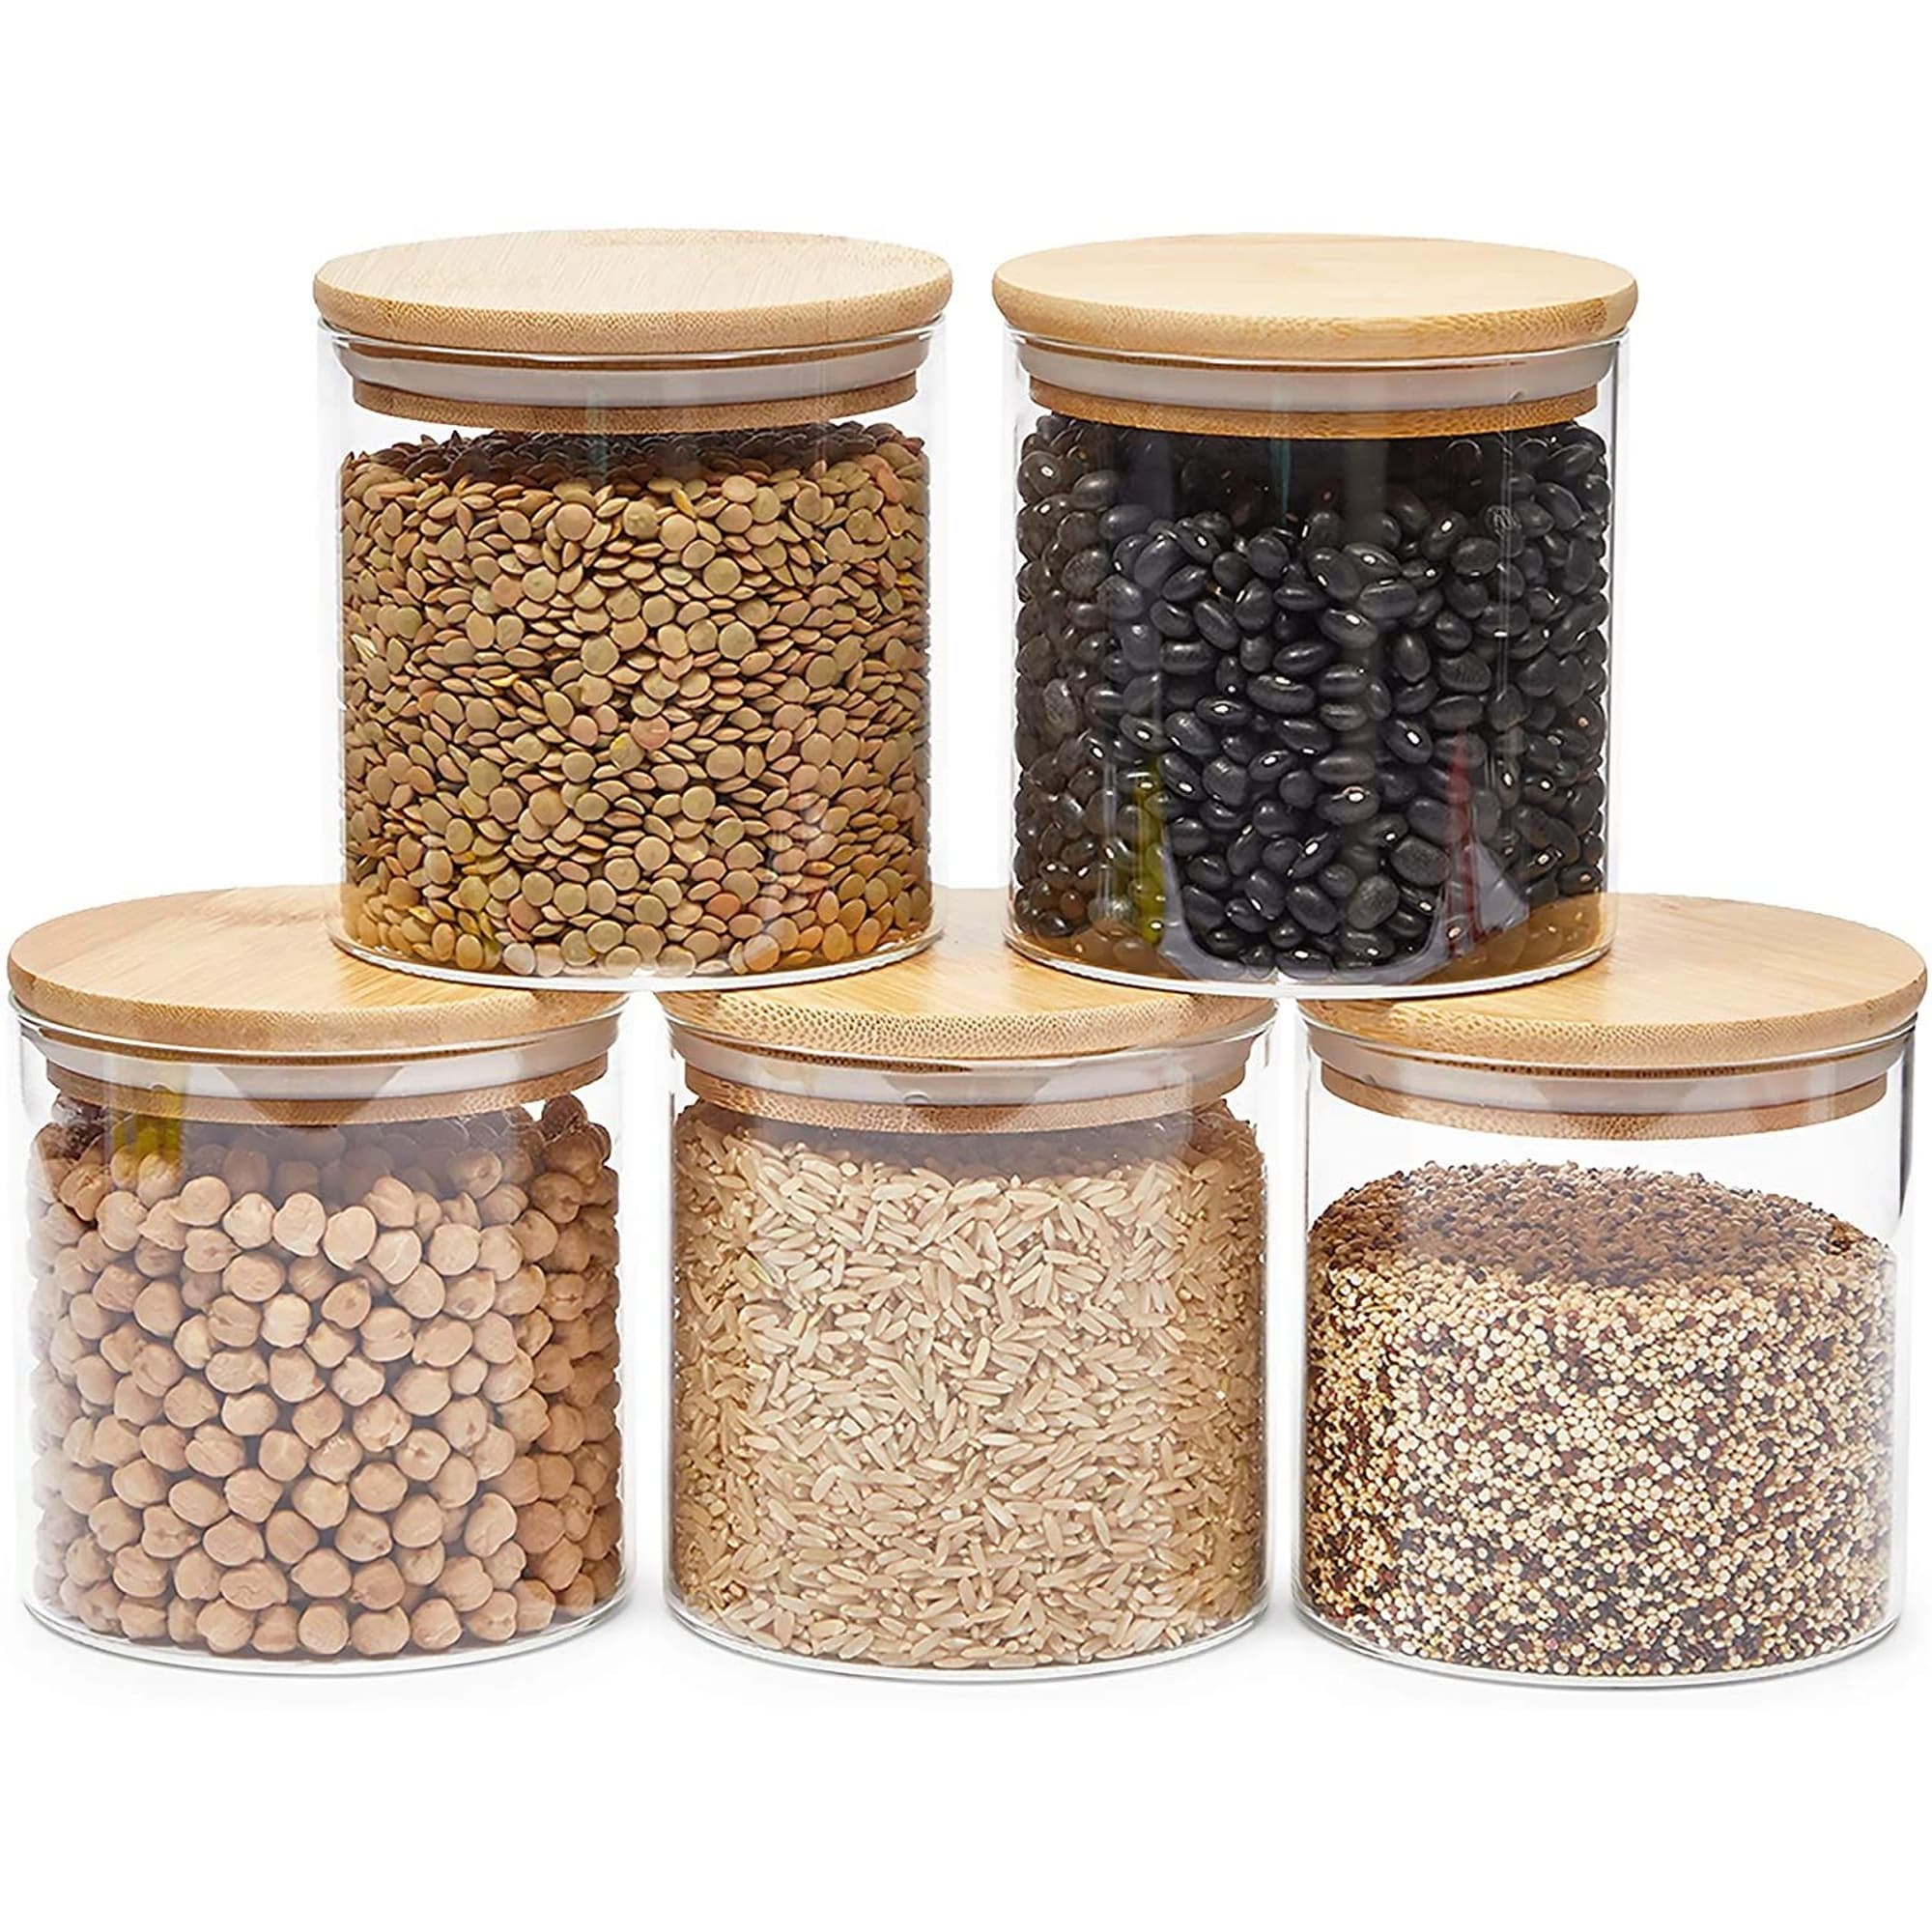 https://ak1.ostkcdn.com/images/products/is/images/direct/9bb57c73768ba216511d1026777f26d1a25cda88/Glass-Canisters-with-Airtight-Bamboo-Lids-for-Pantry-Storage-%284-x-4.13-In%2C-5-Pack%29.jpg